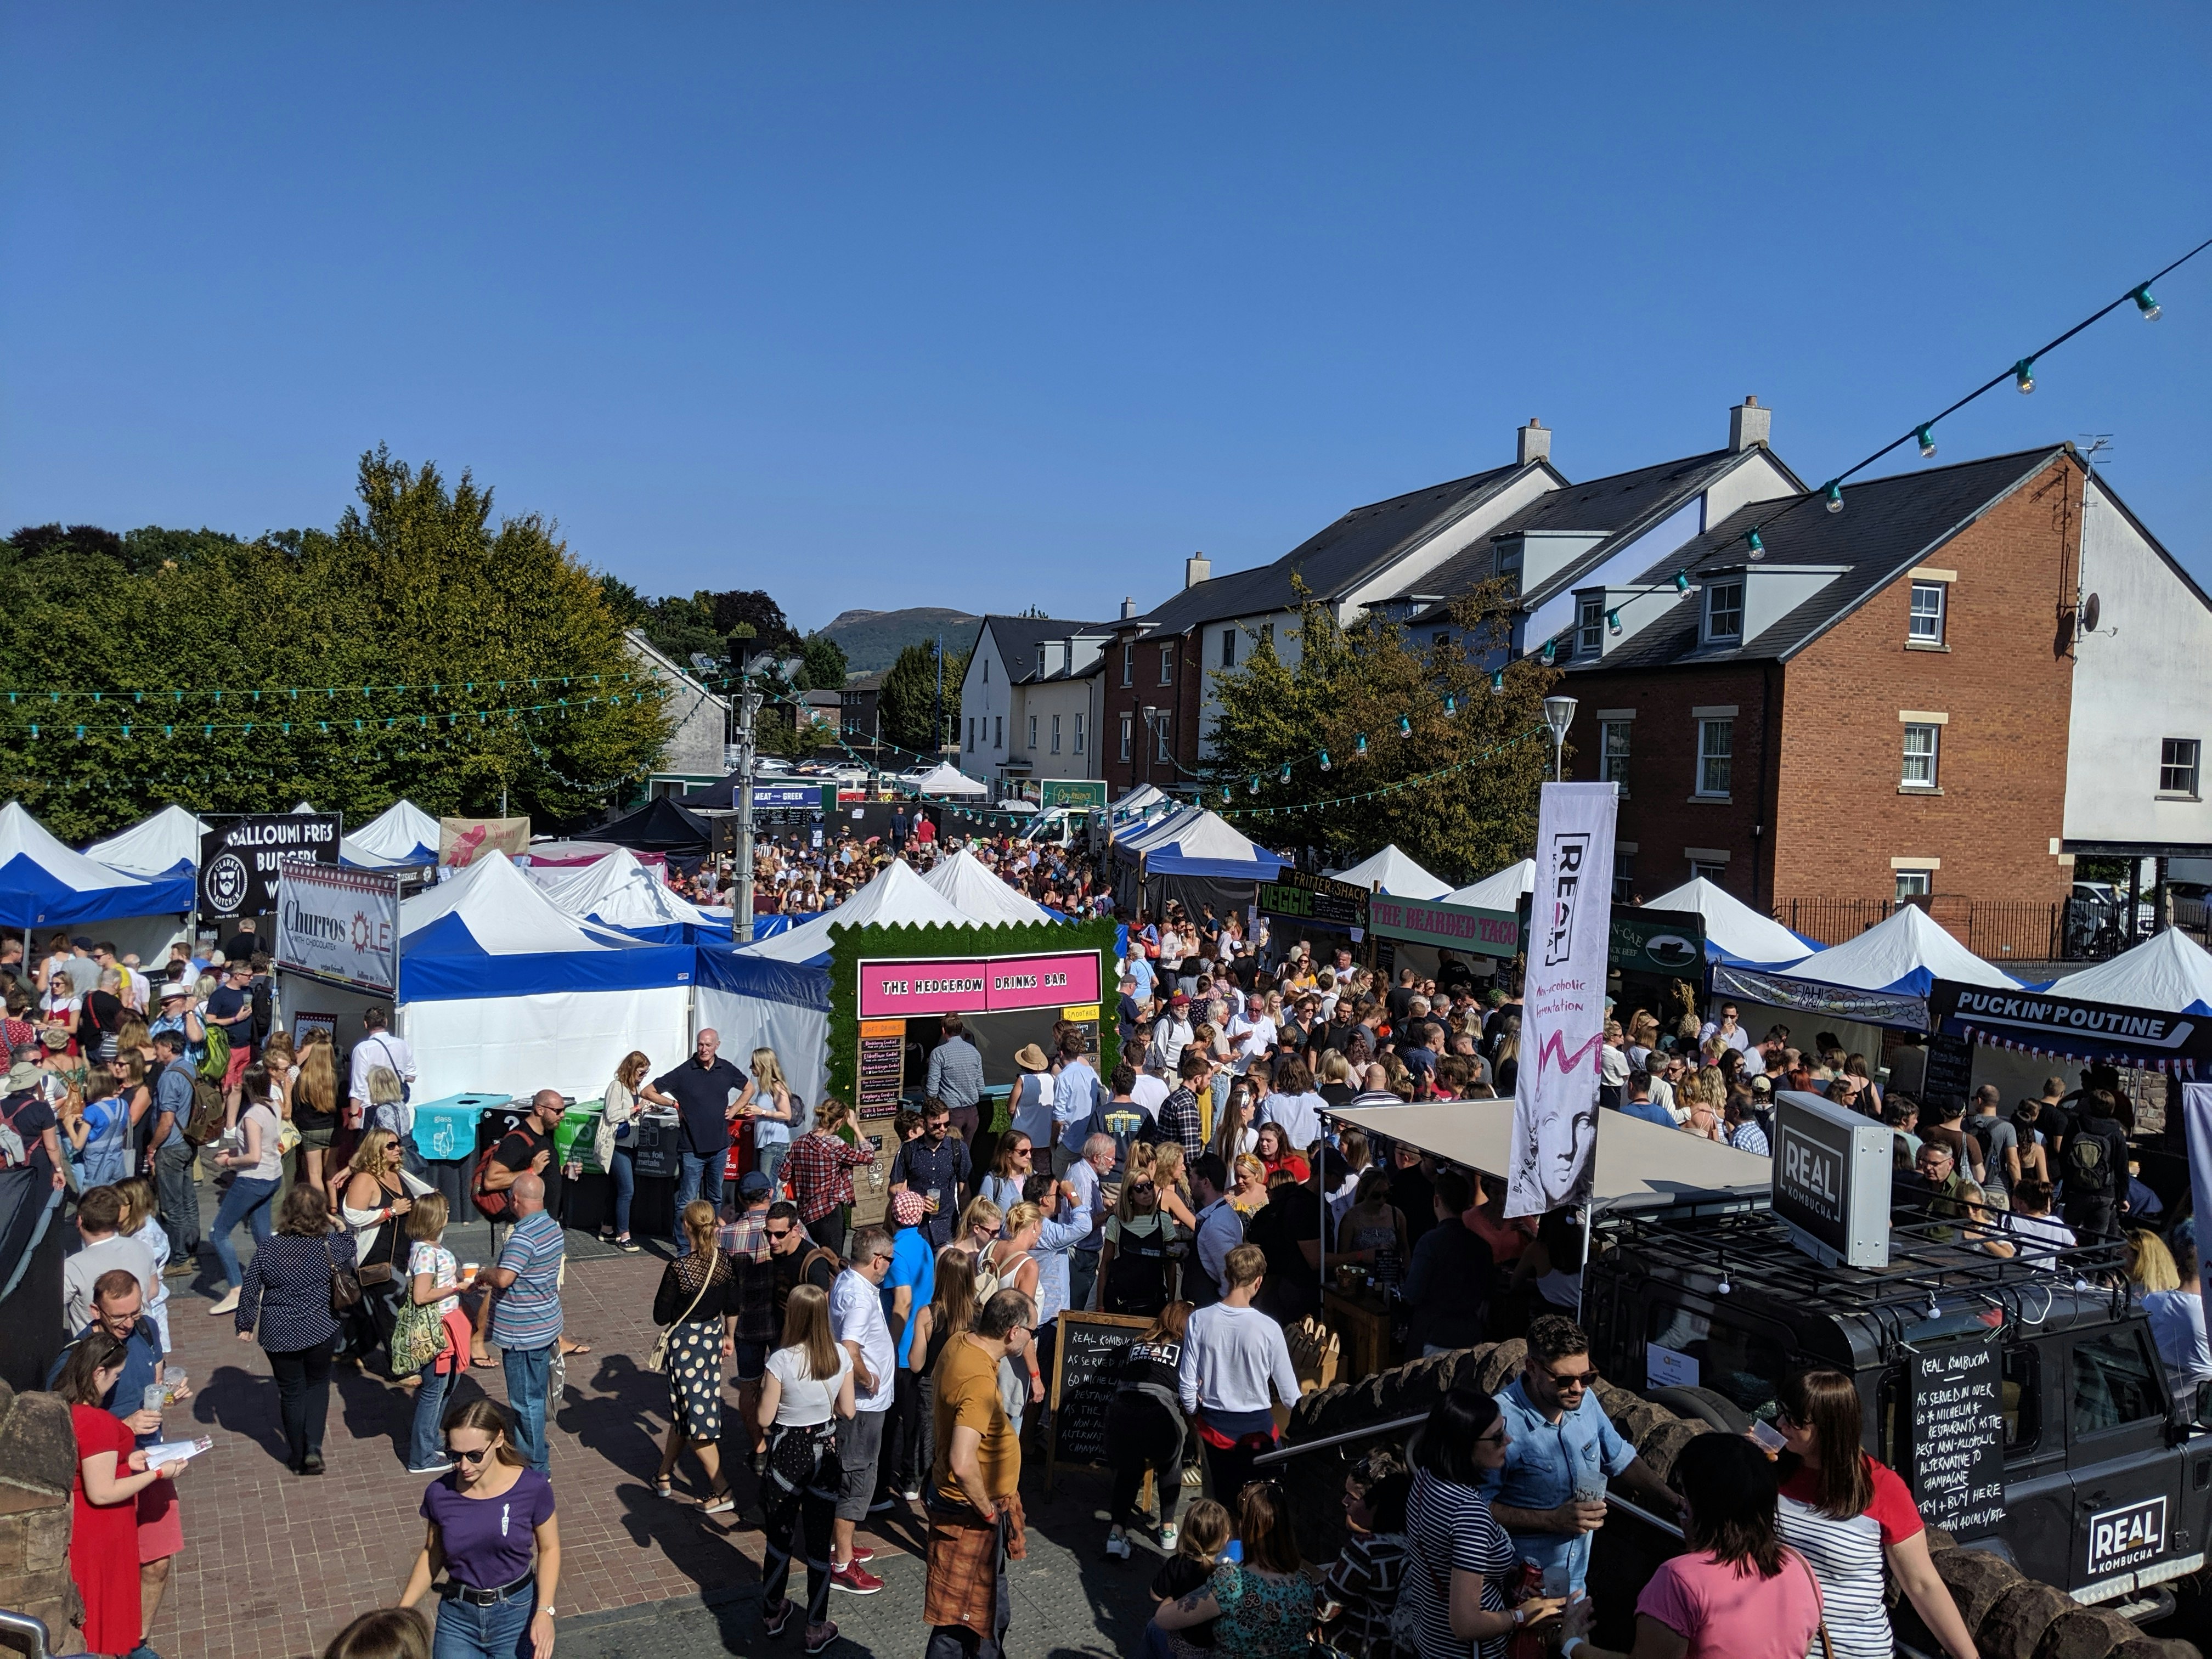 Multiple food stalls and crowds fill the streets of Abergavenny during the annual food festival